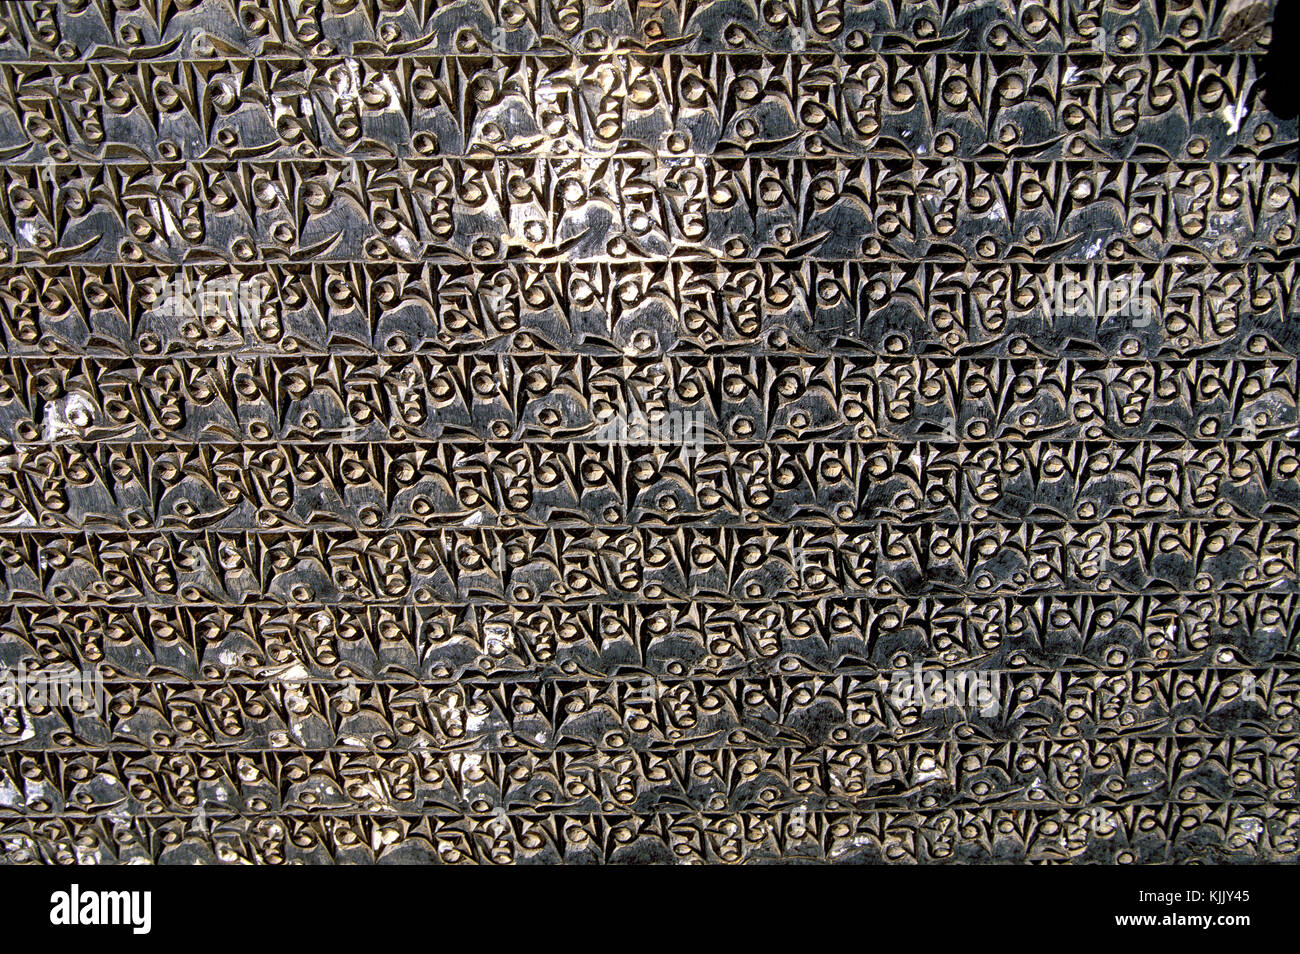 Mantras and Tibetan scriptures engraved on a stone. Nepal. Stock Photo